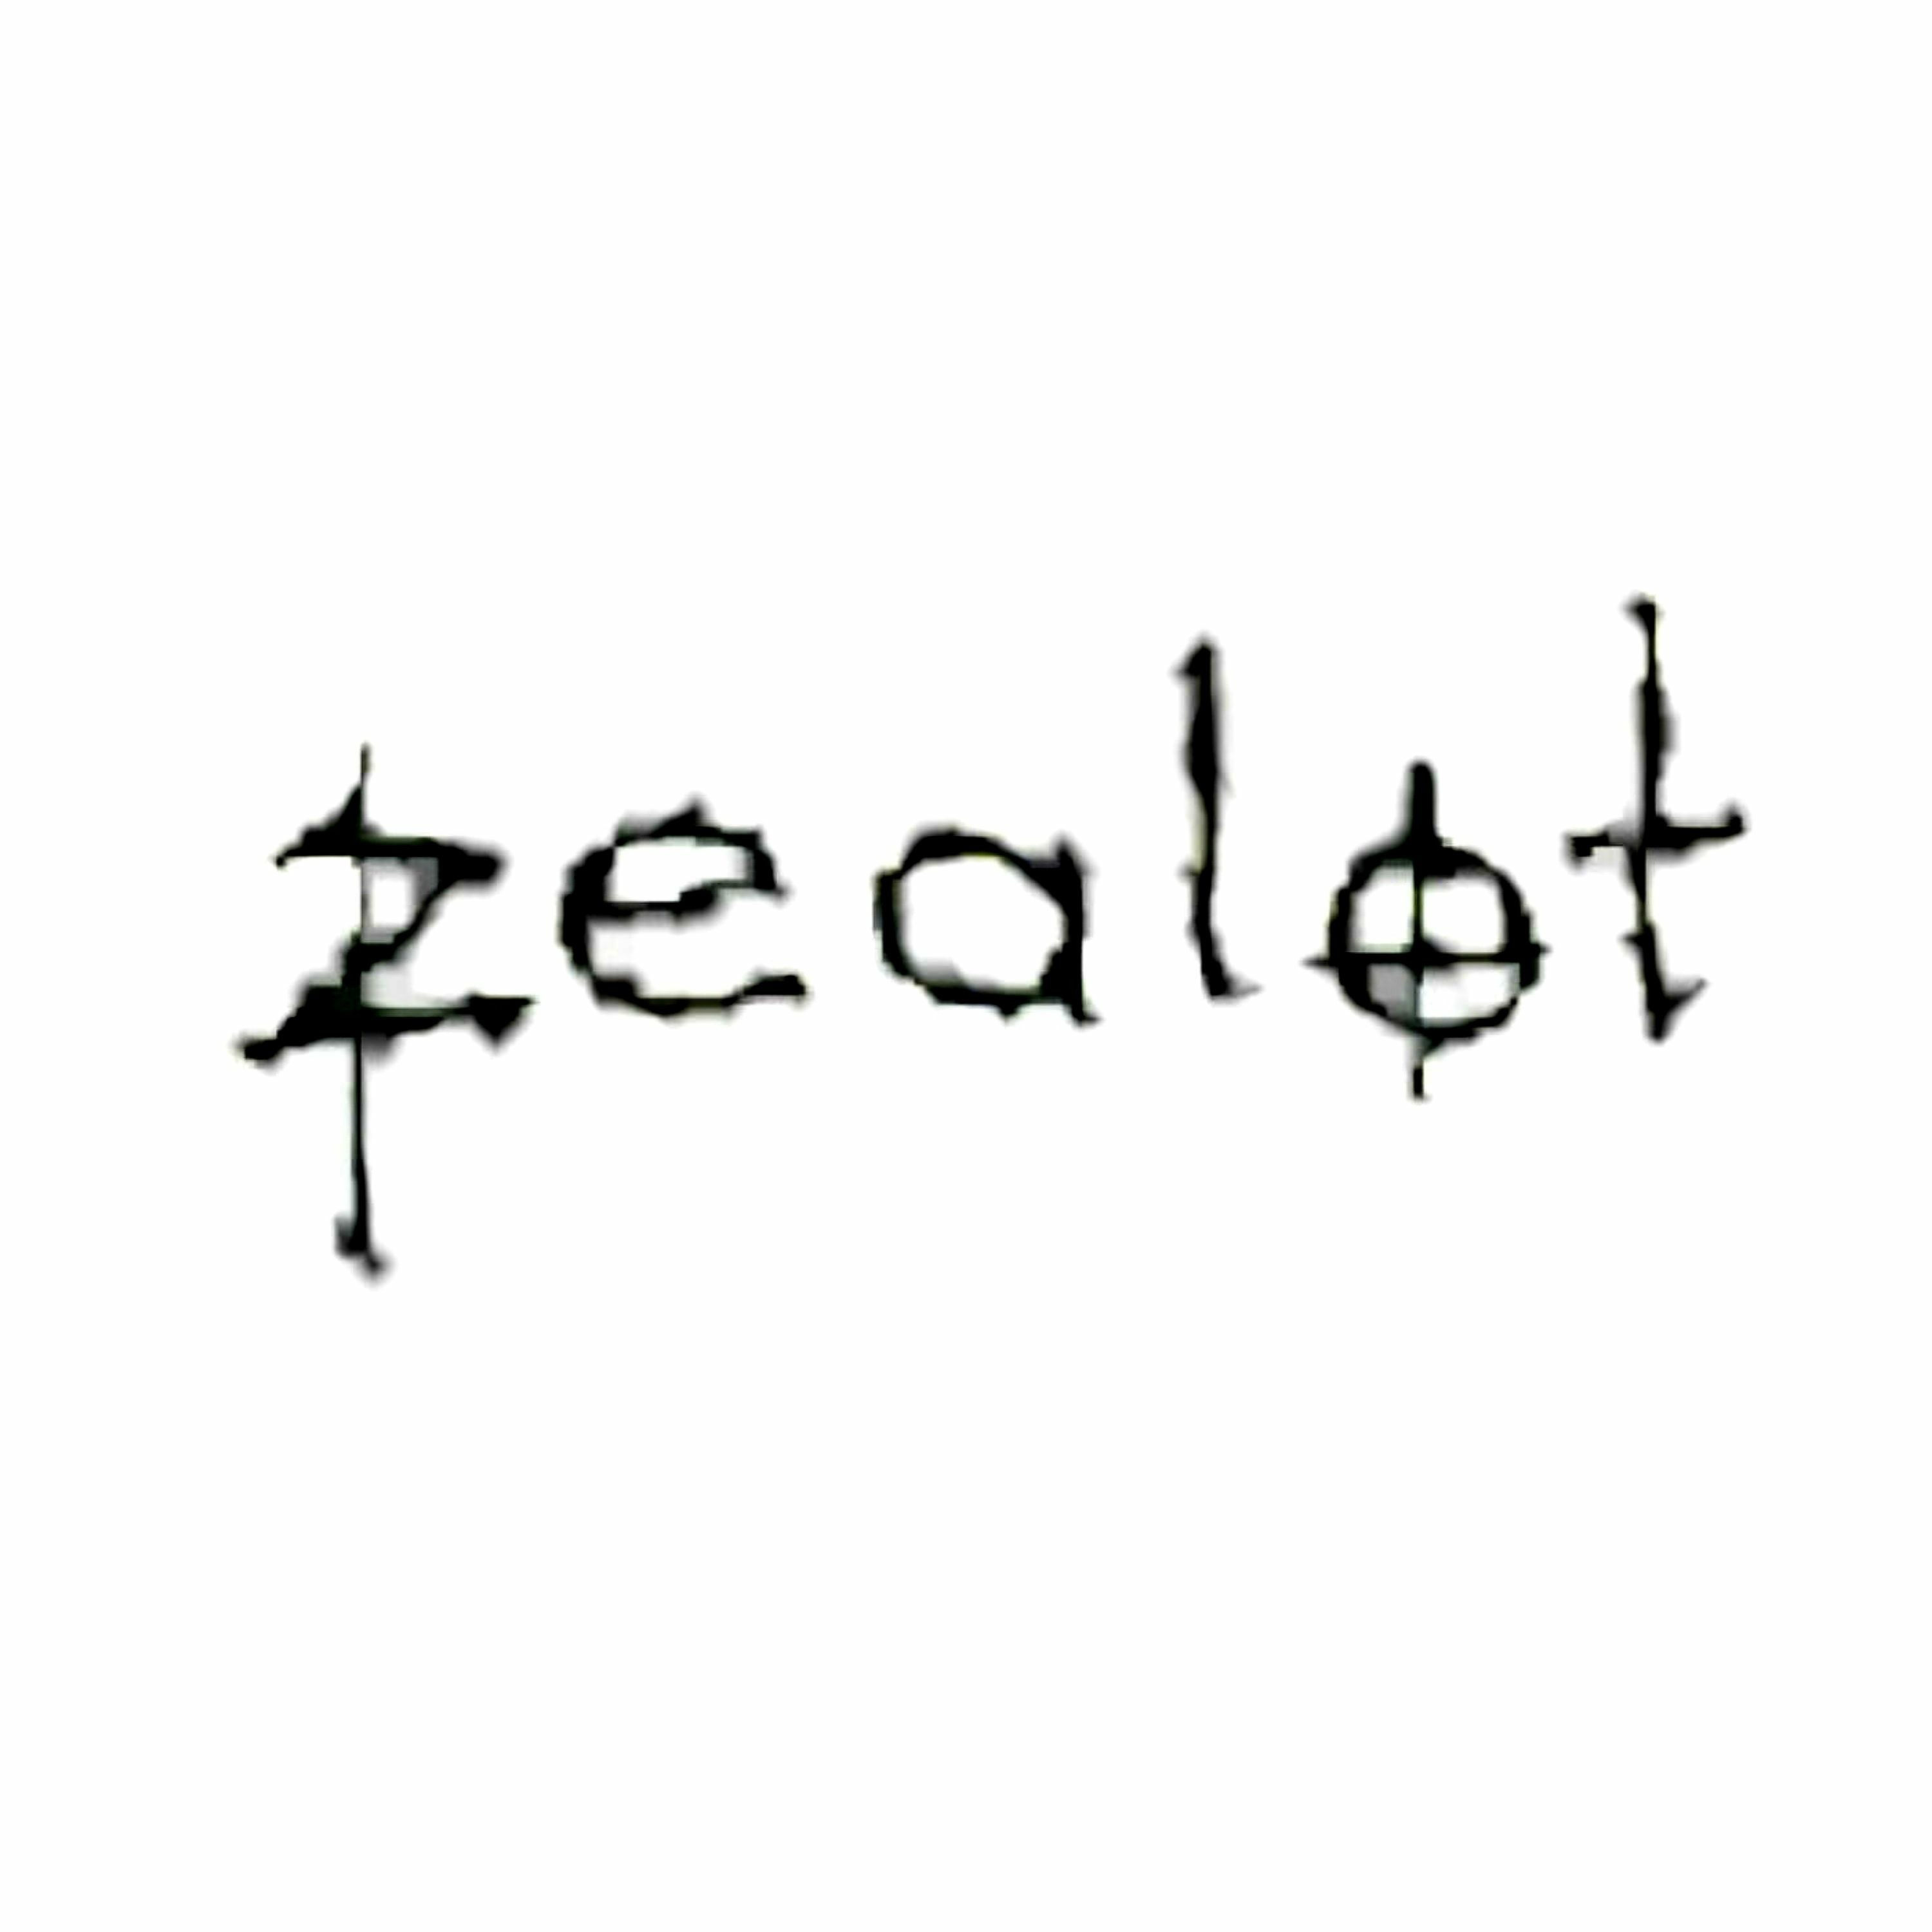 A message from Zealot